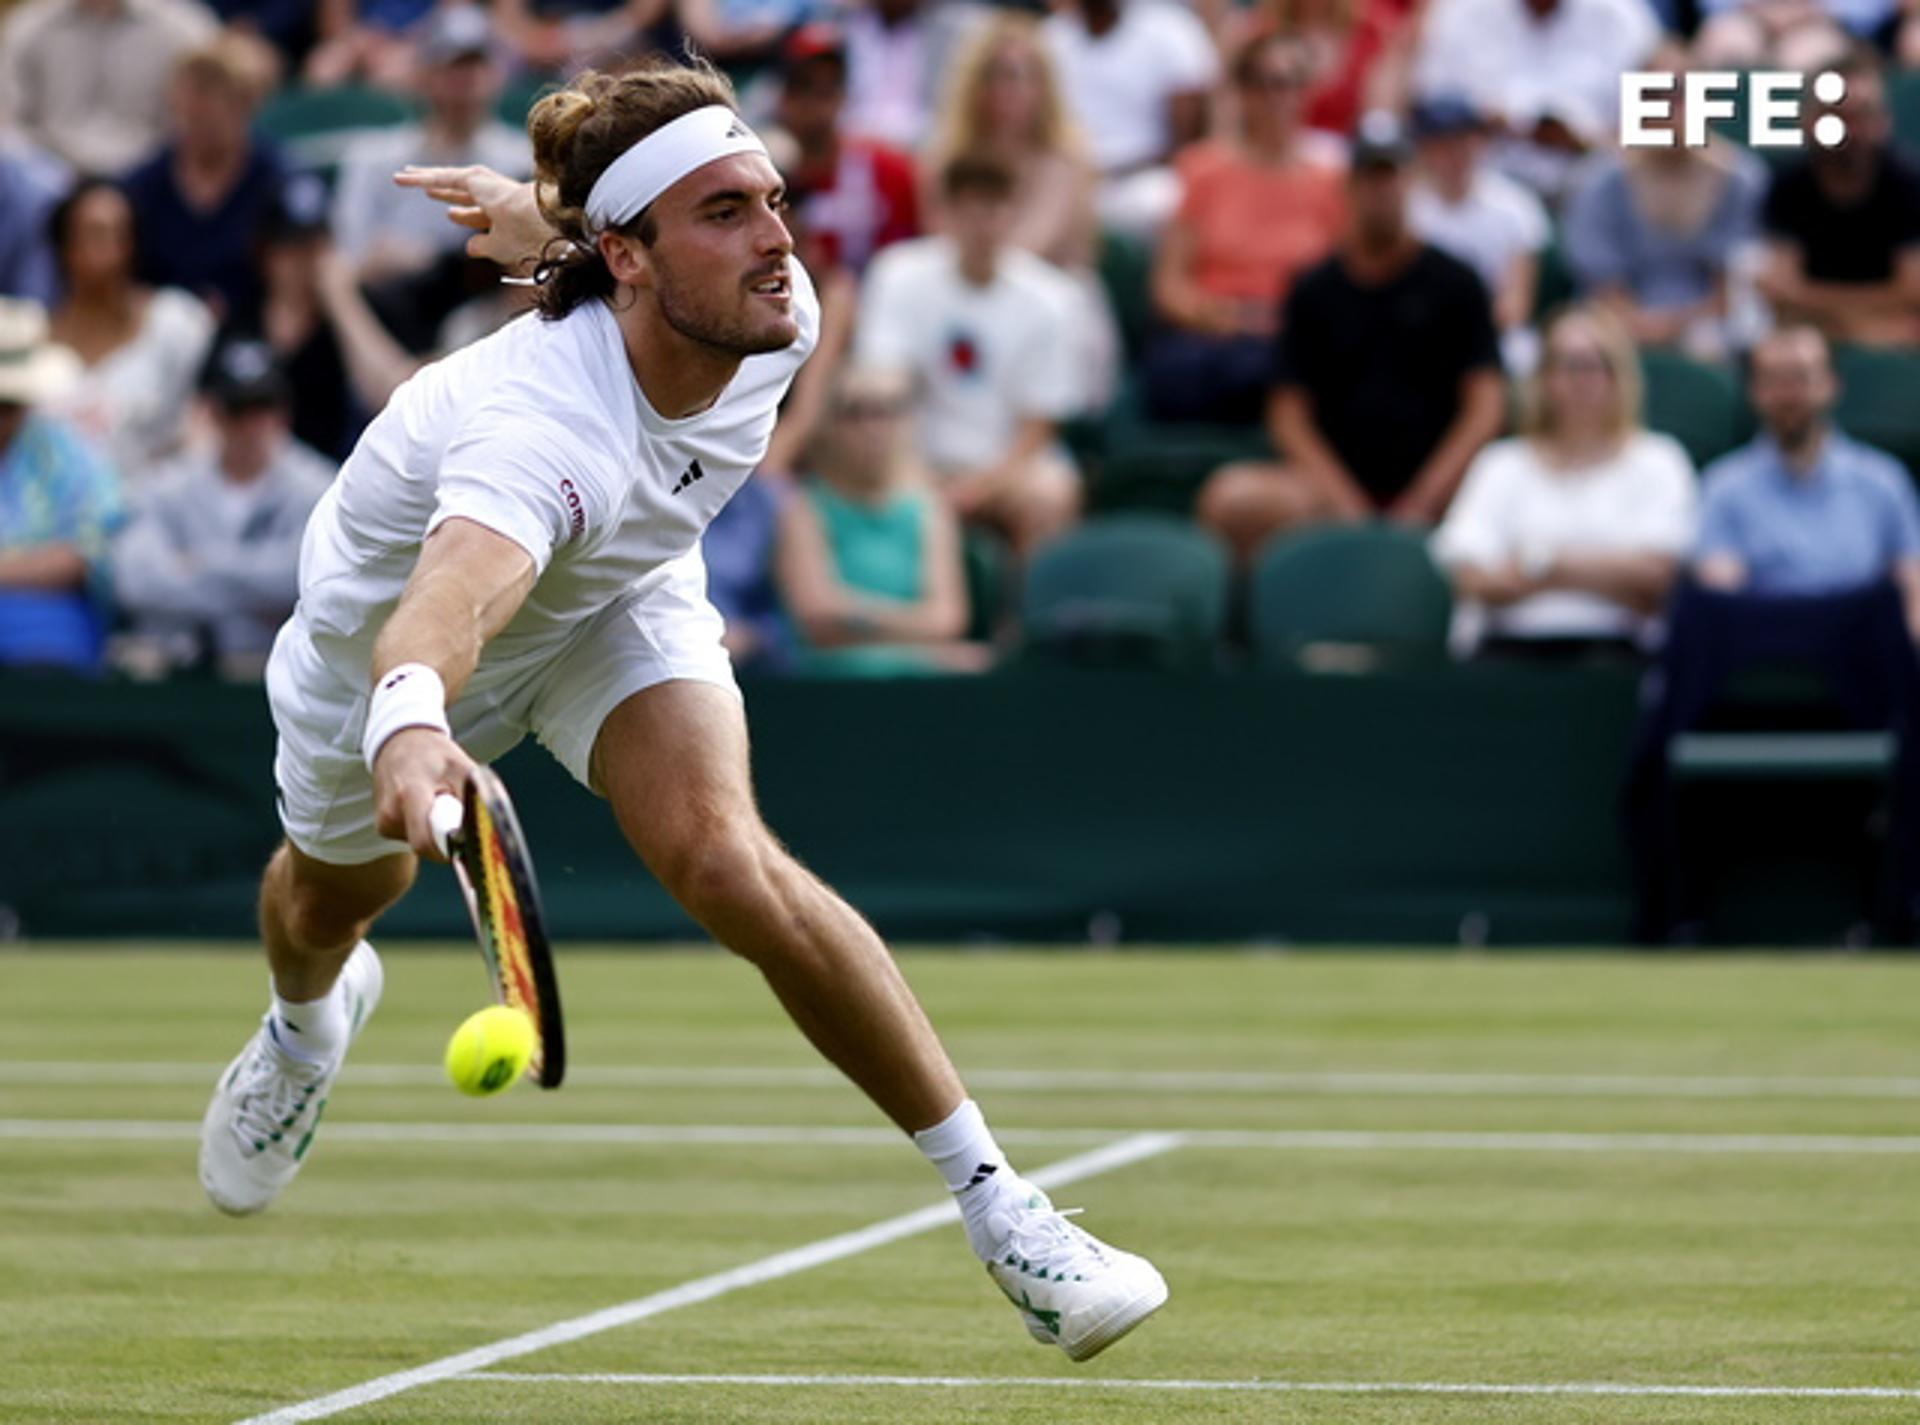 Stefanos Tsitsipas in action against Laslo Djere during their third round match at the Wimbledon Championships in London on 8 July 2023. EFE/EPA/TOLGA AKMEN EDITORIAL USE ONLY
